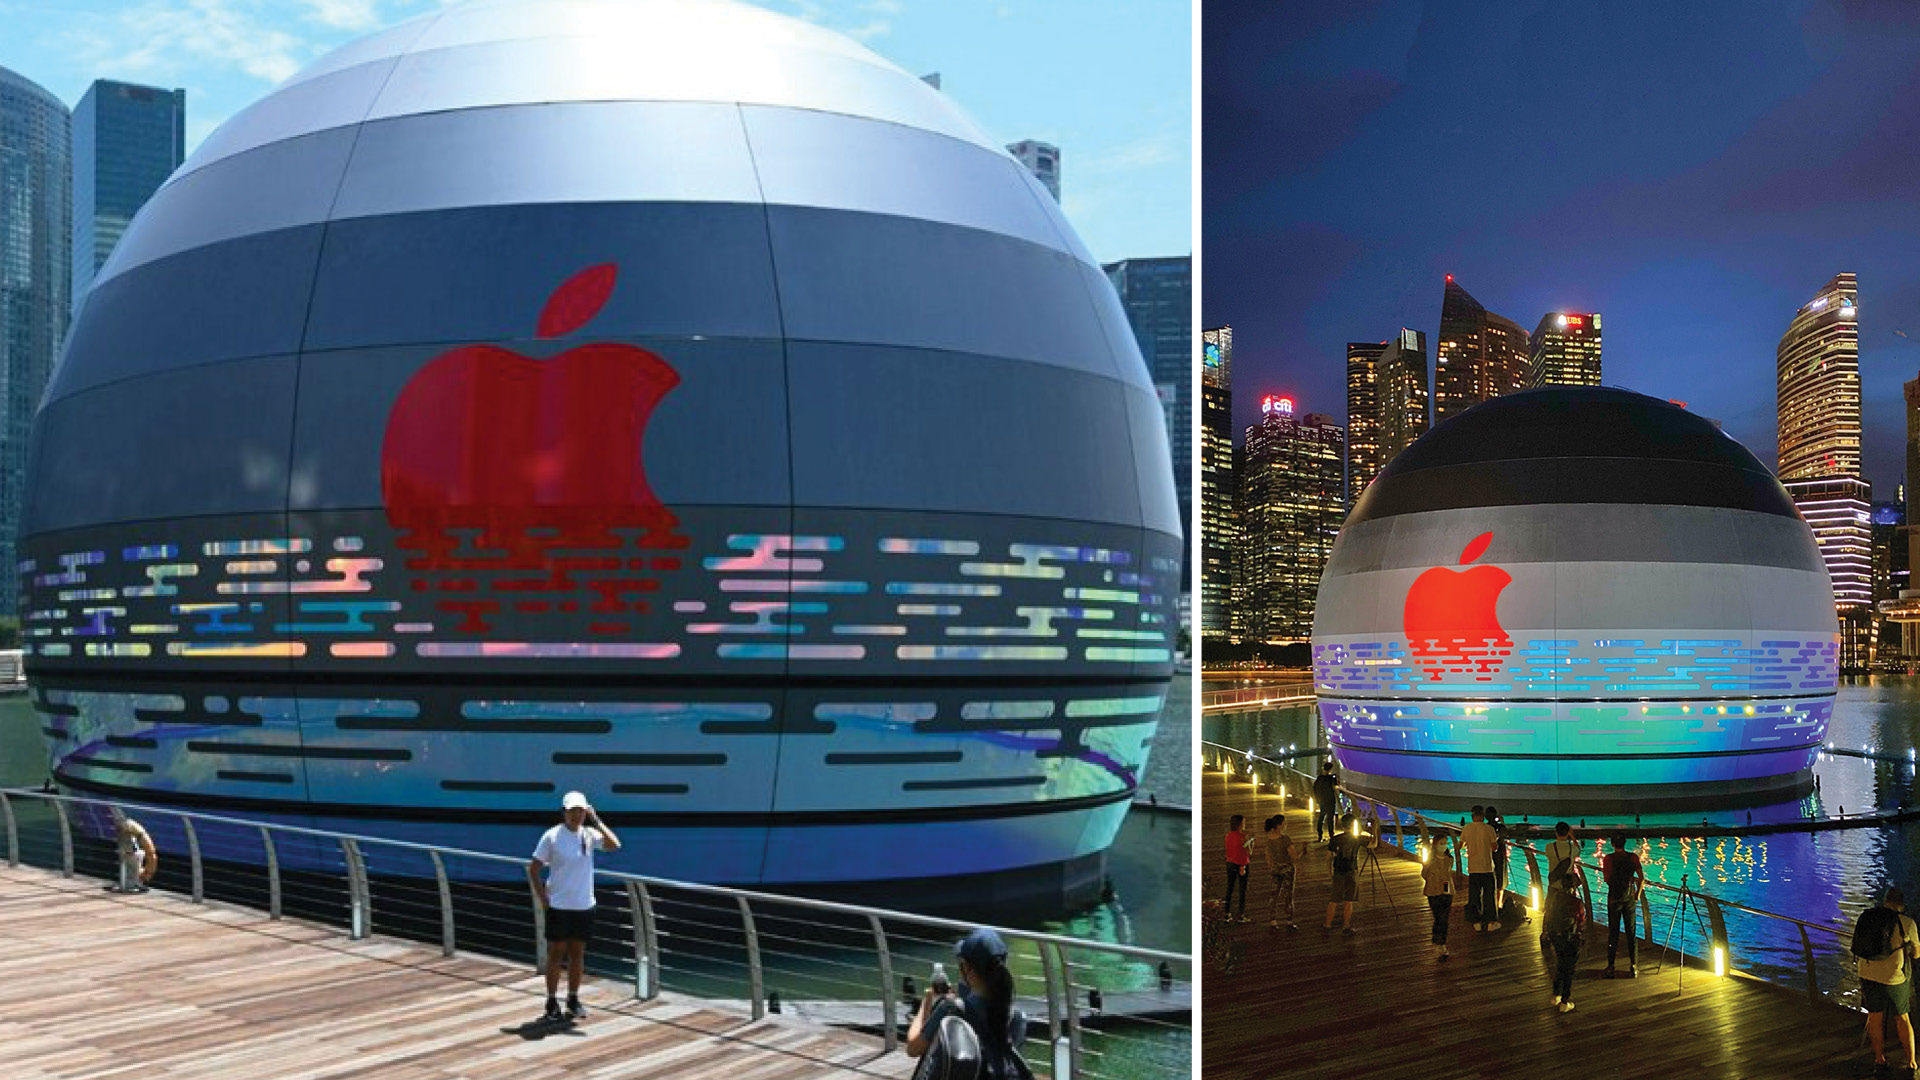 Apple plans to open a 'floating' store in Singapore